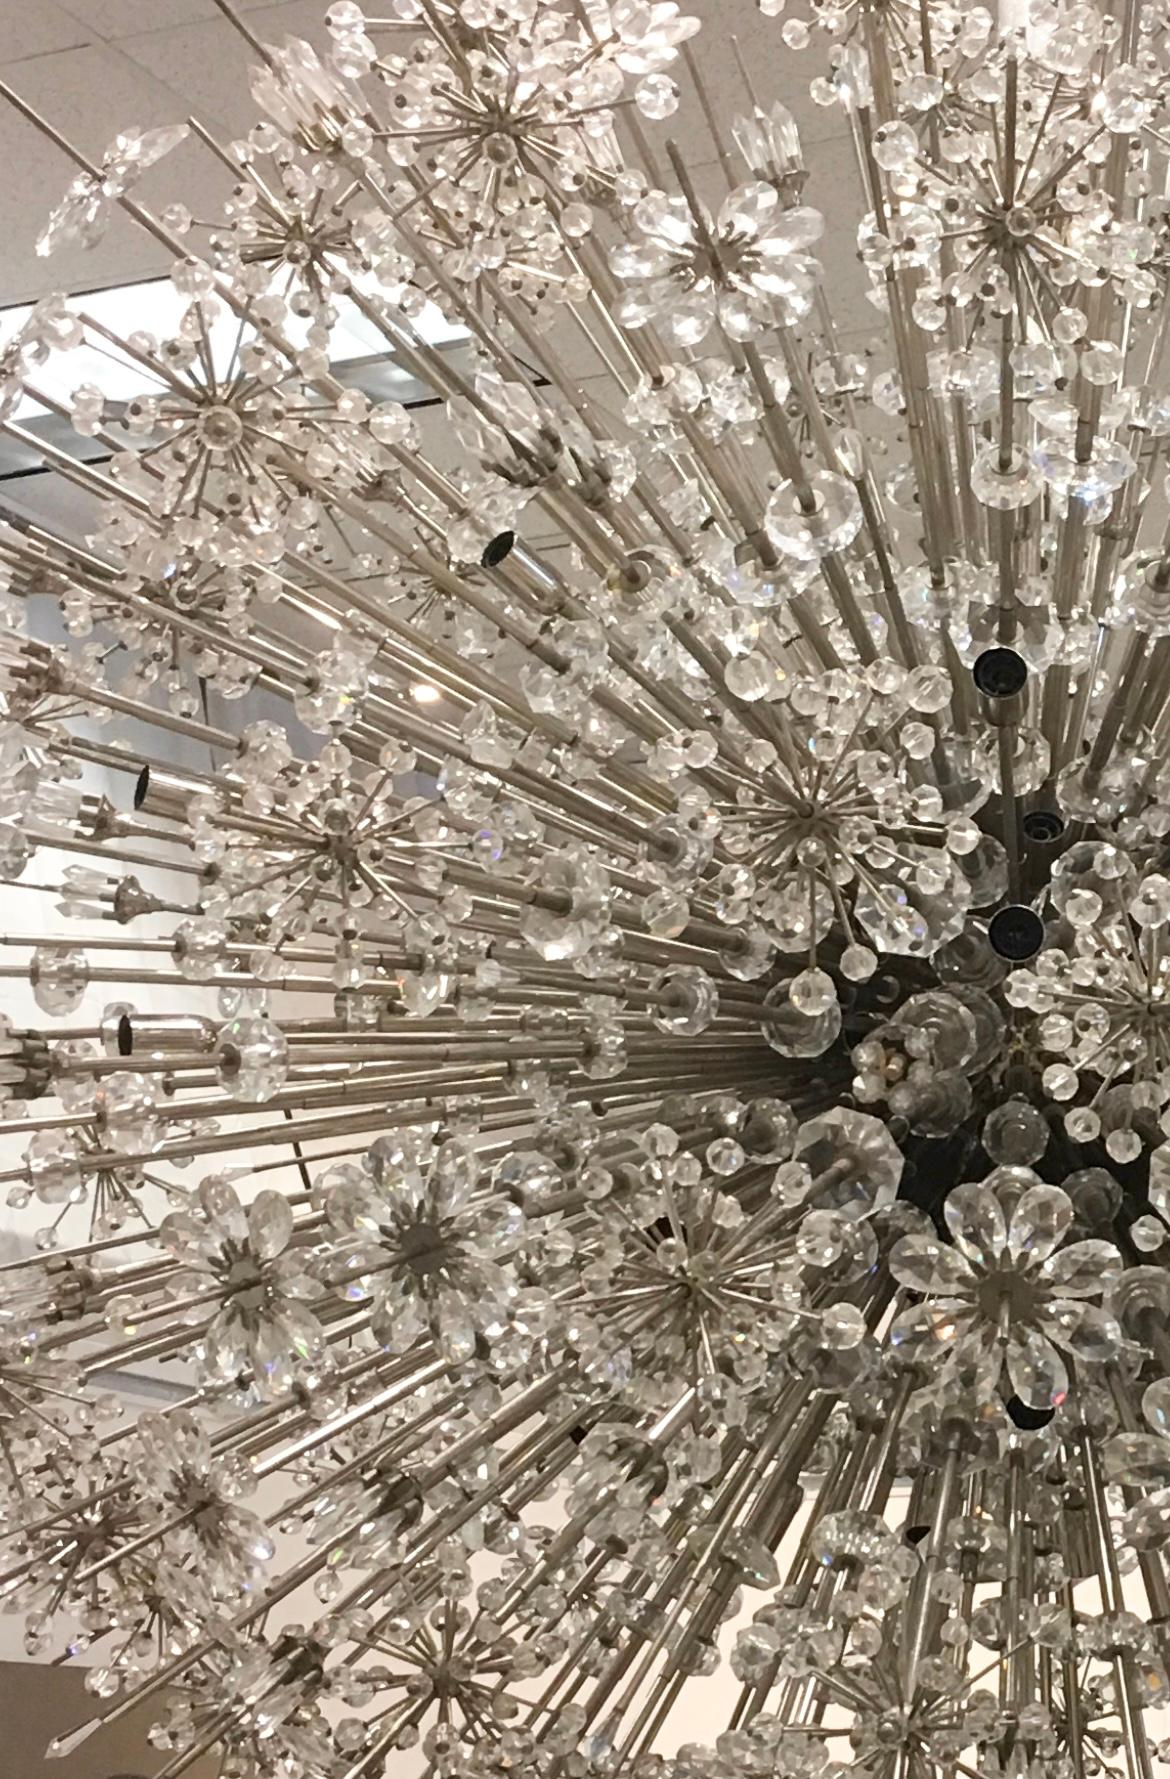 Amazing Monumental Sputnik Chandelier by J. & L. Lobmeyr, 1960s, as seen in the Metropolitan Opera House fixtures. Chrome and enameled steel with Swarovski crystals.